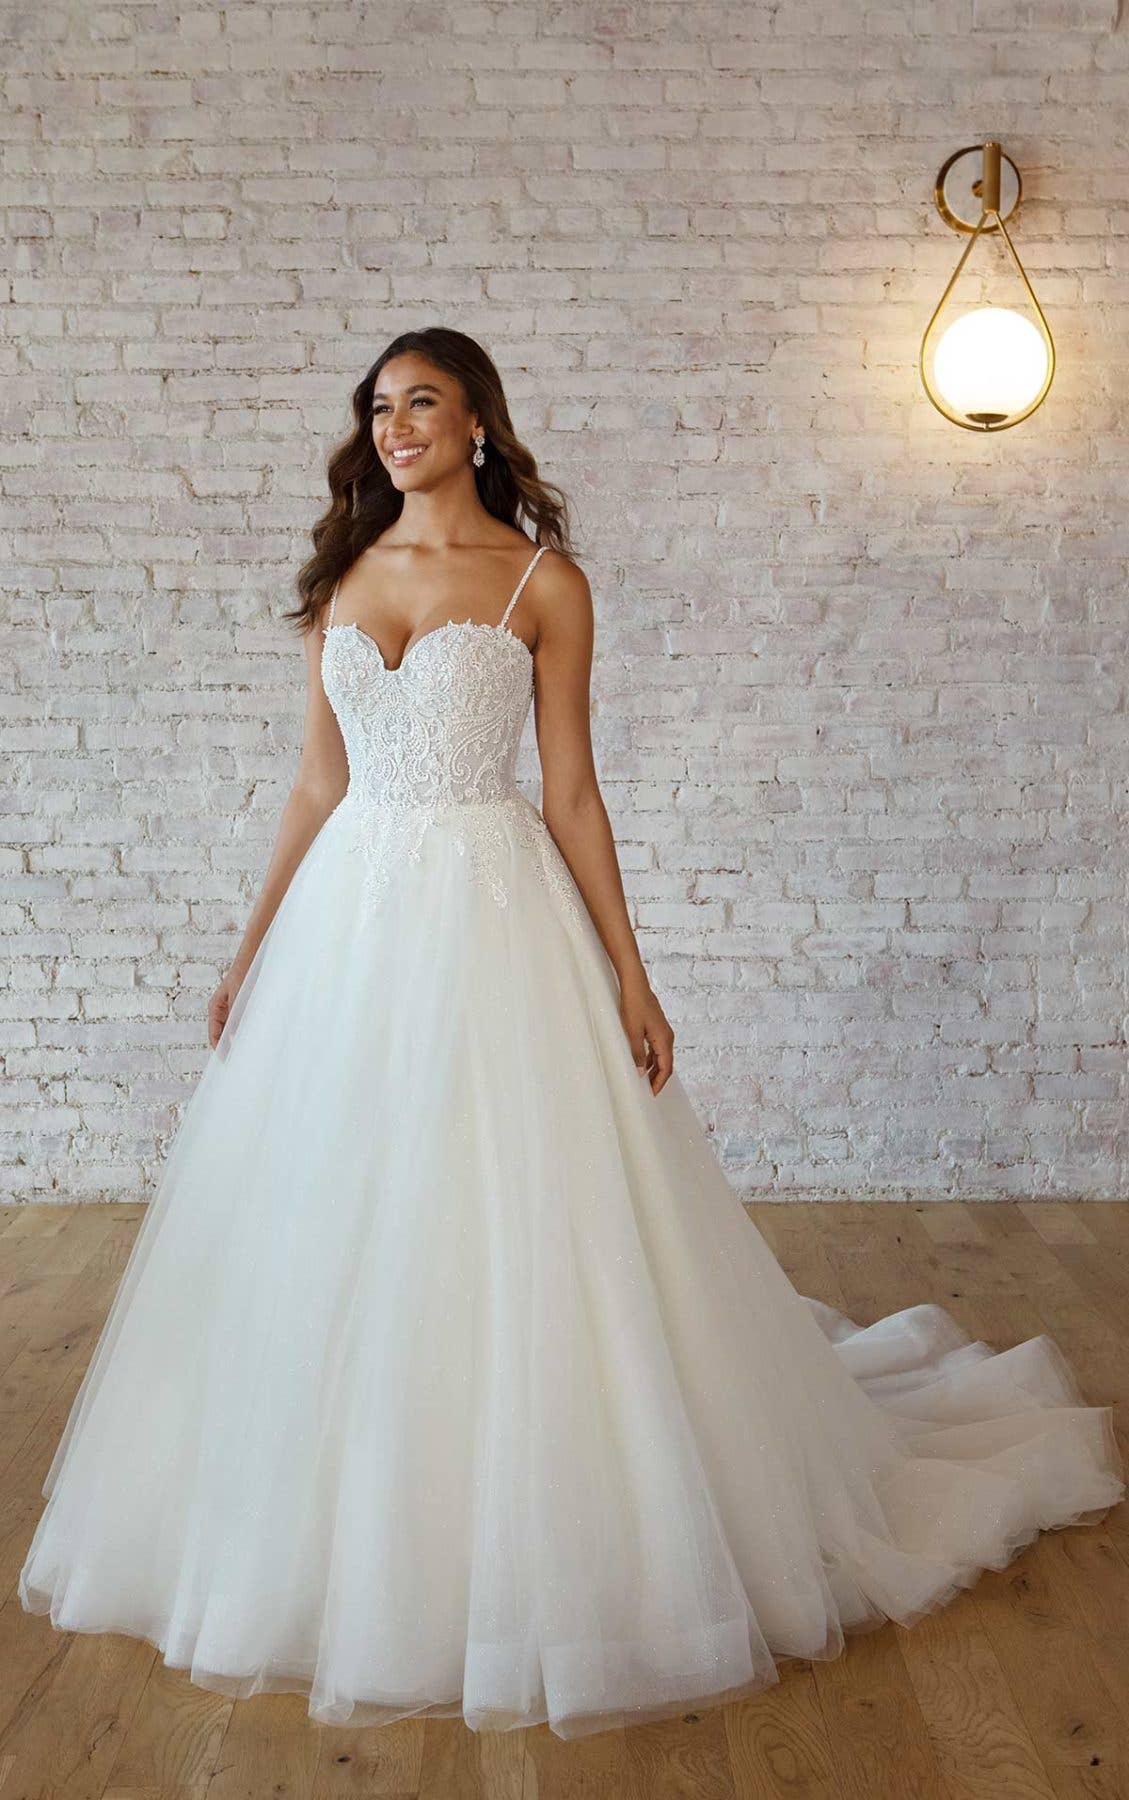 Rate Wedding Dresses When You'll Get Married Quiz